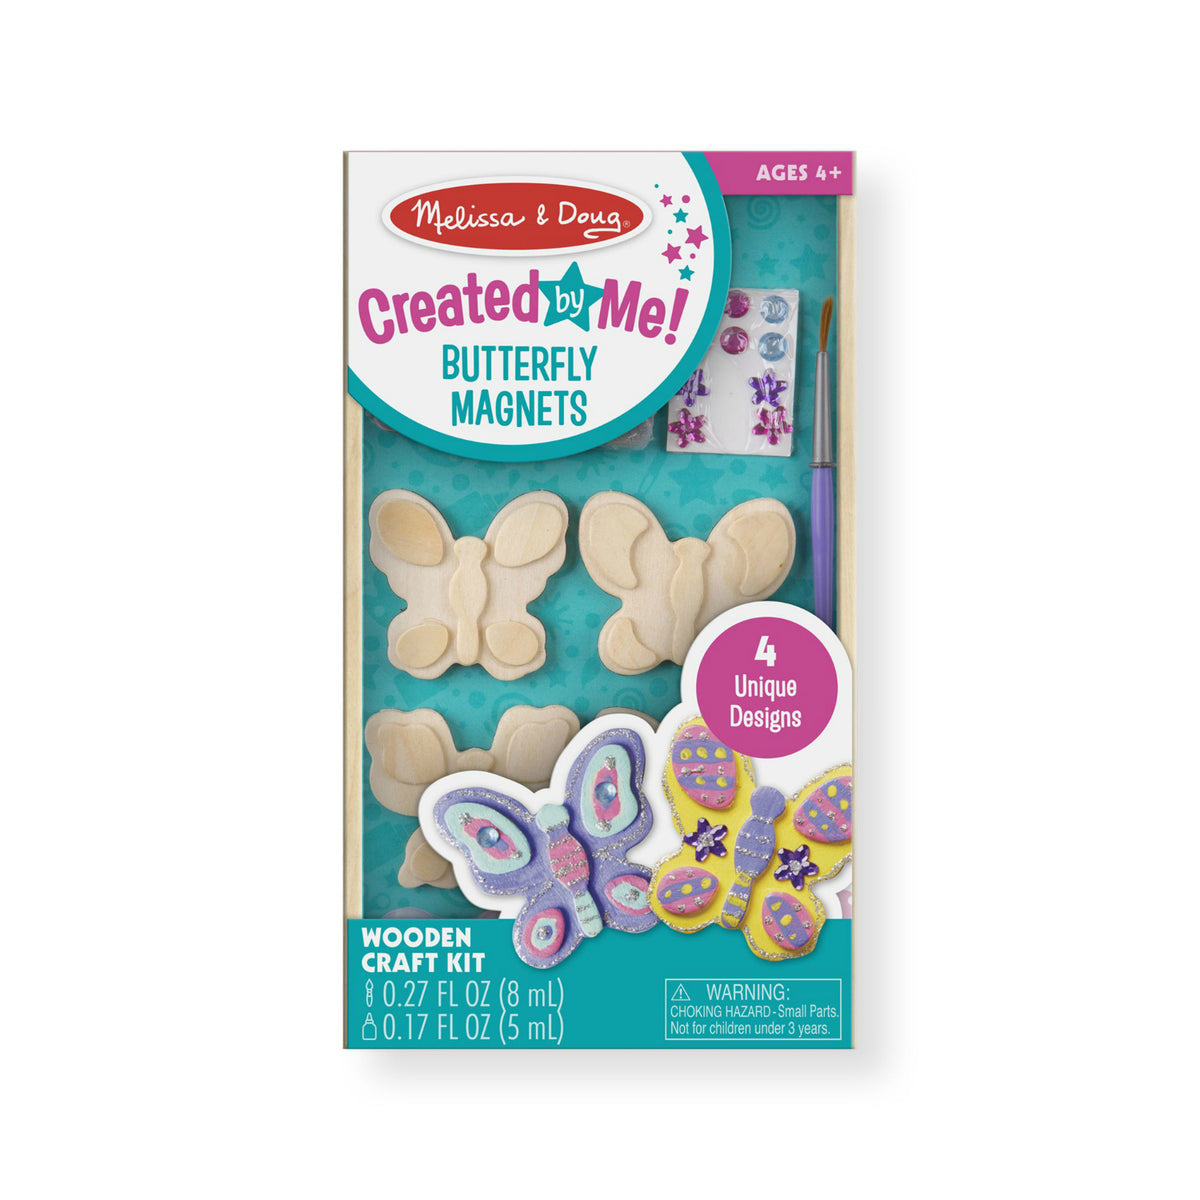 Melissa & Doug 9515 Created by Me! Butterfly Magnets Wooden Craft Kit, Age 4+